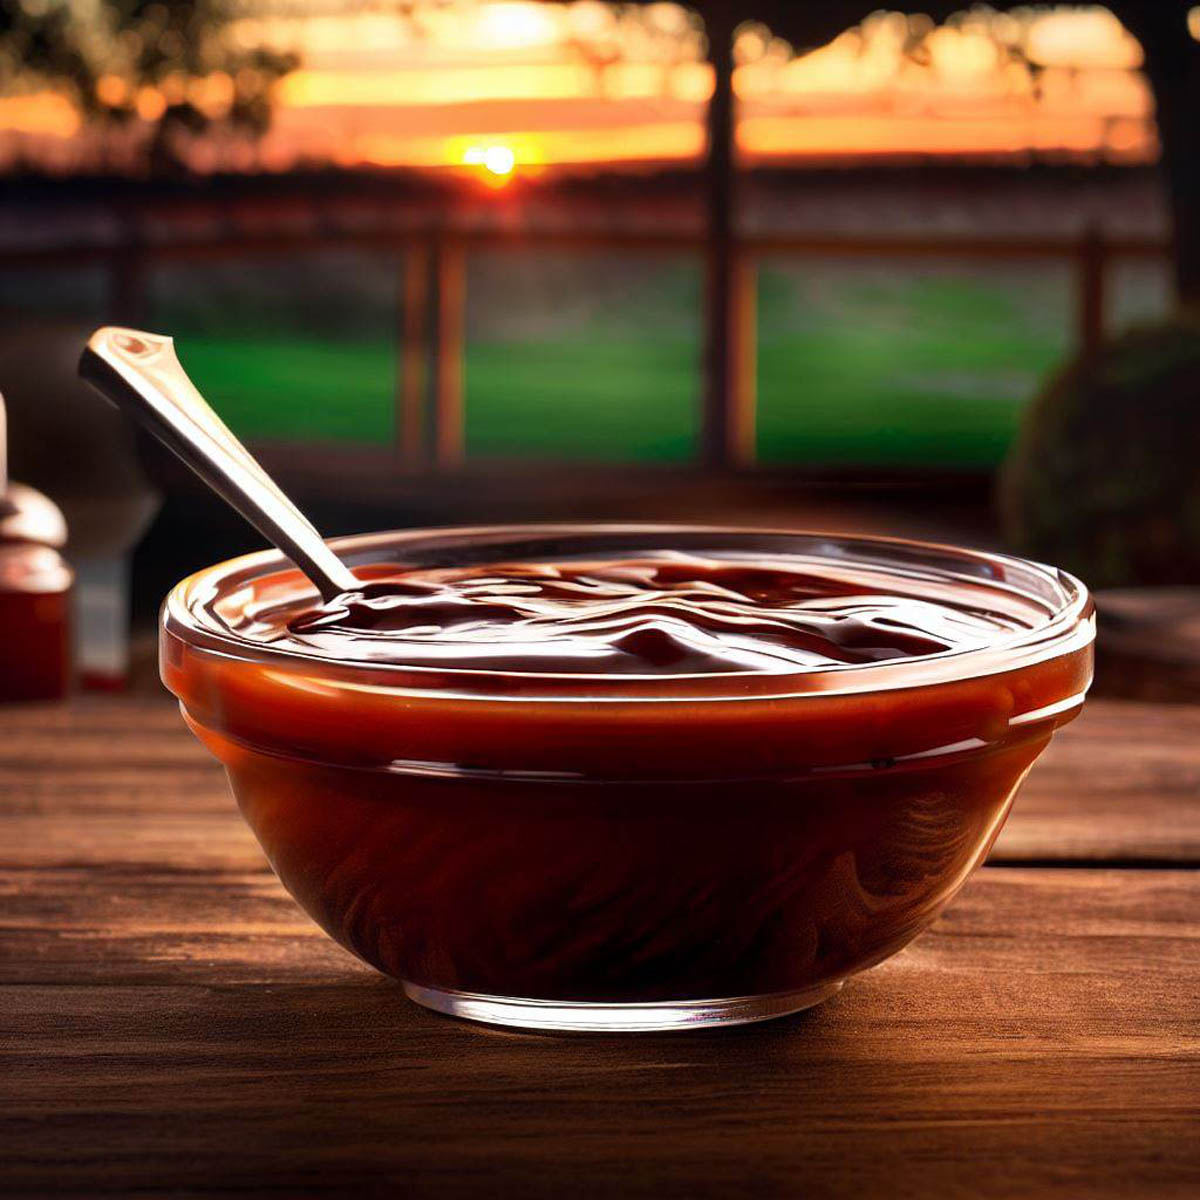 A tantalizing image of J Willy's Signature BBQ Sauce in a bowl.